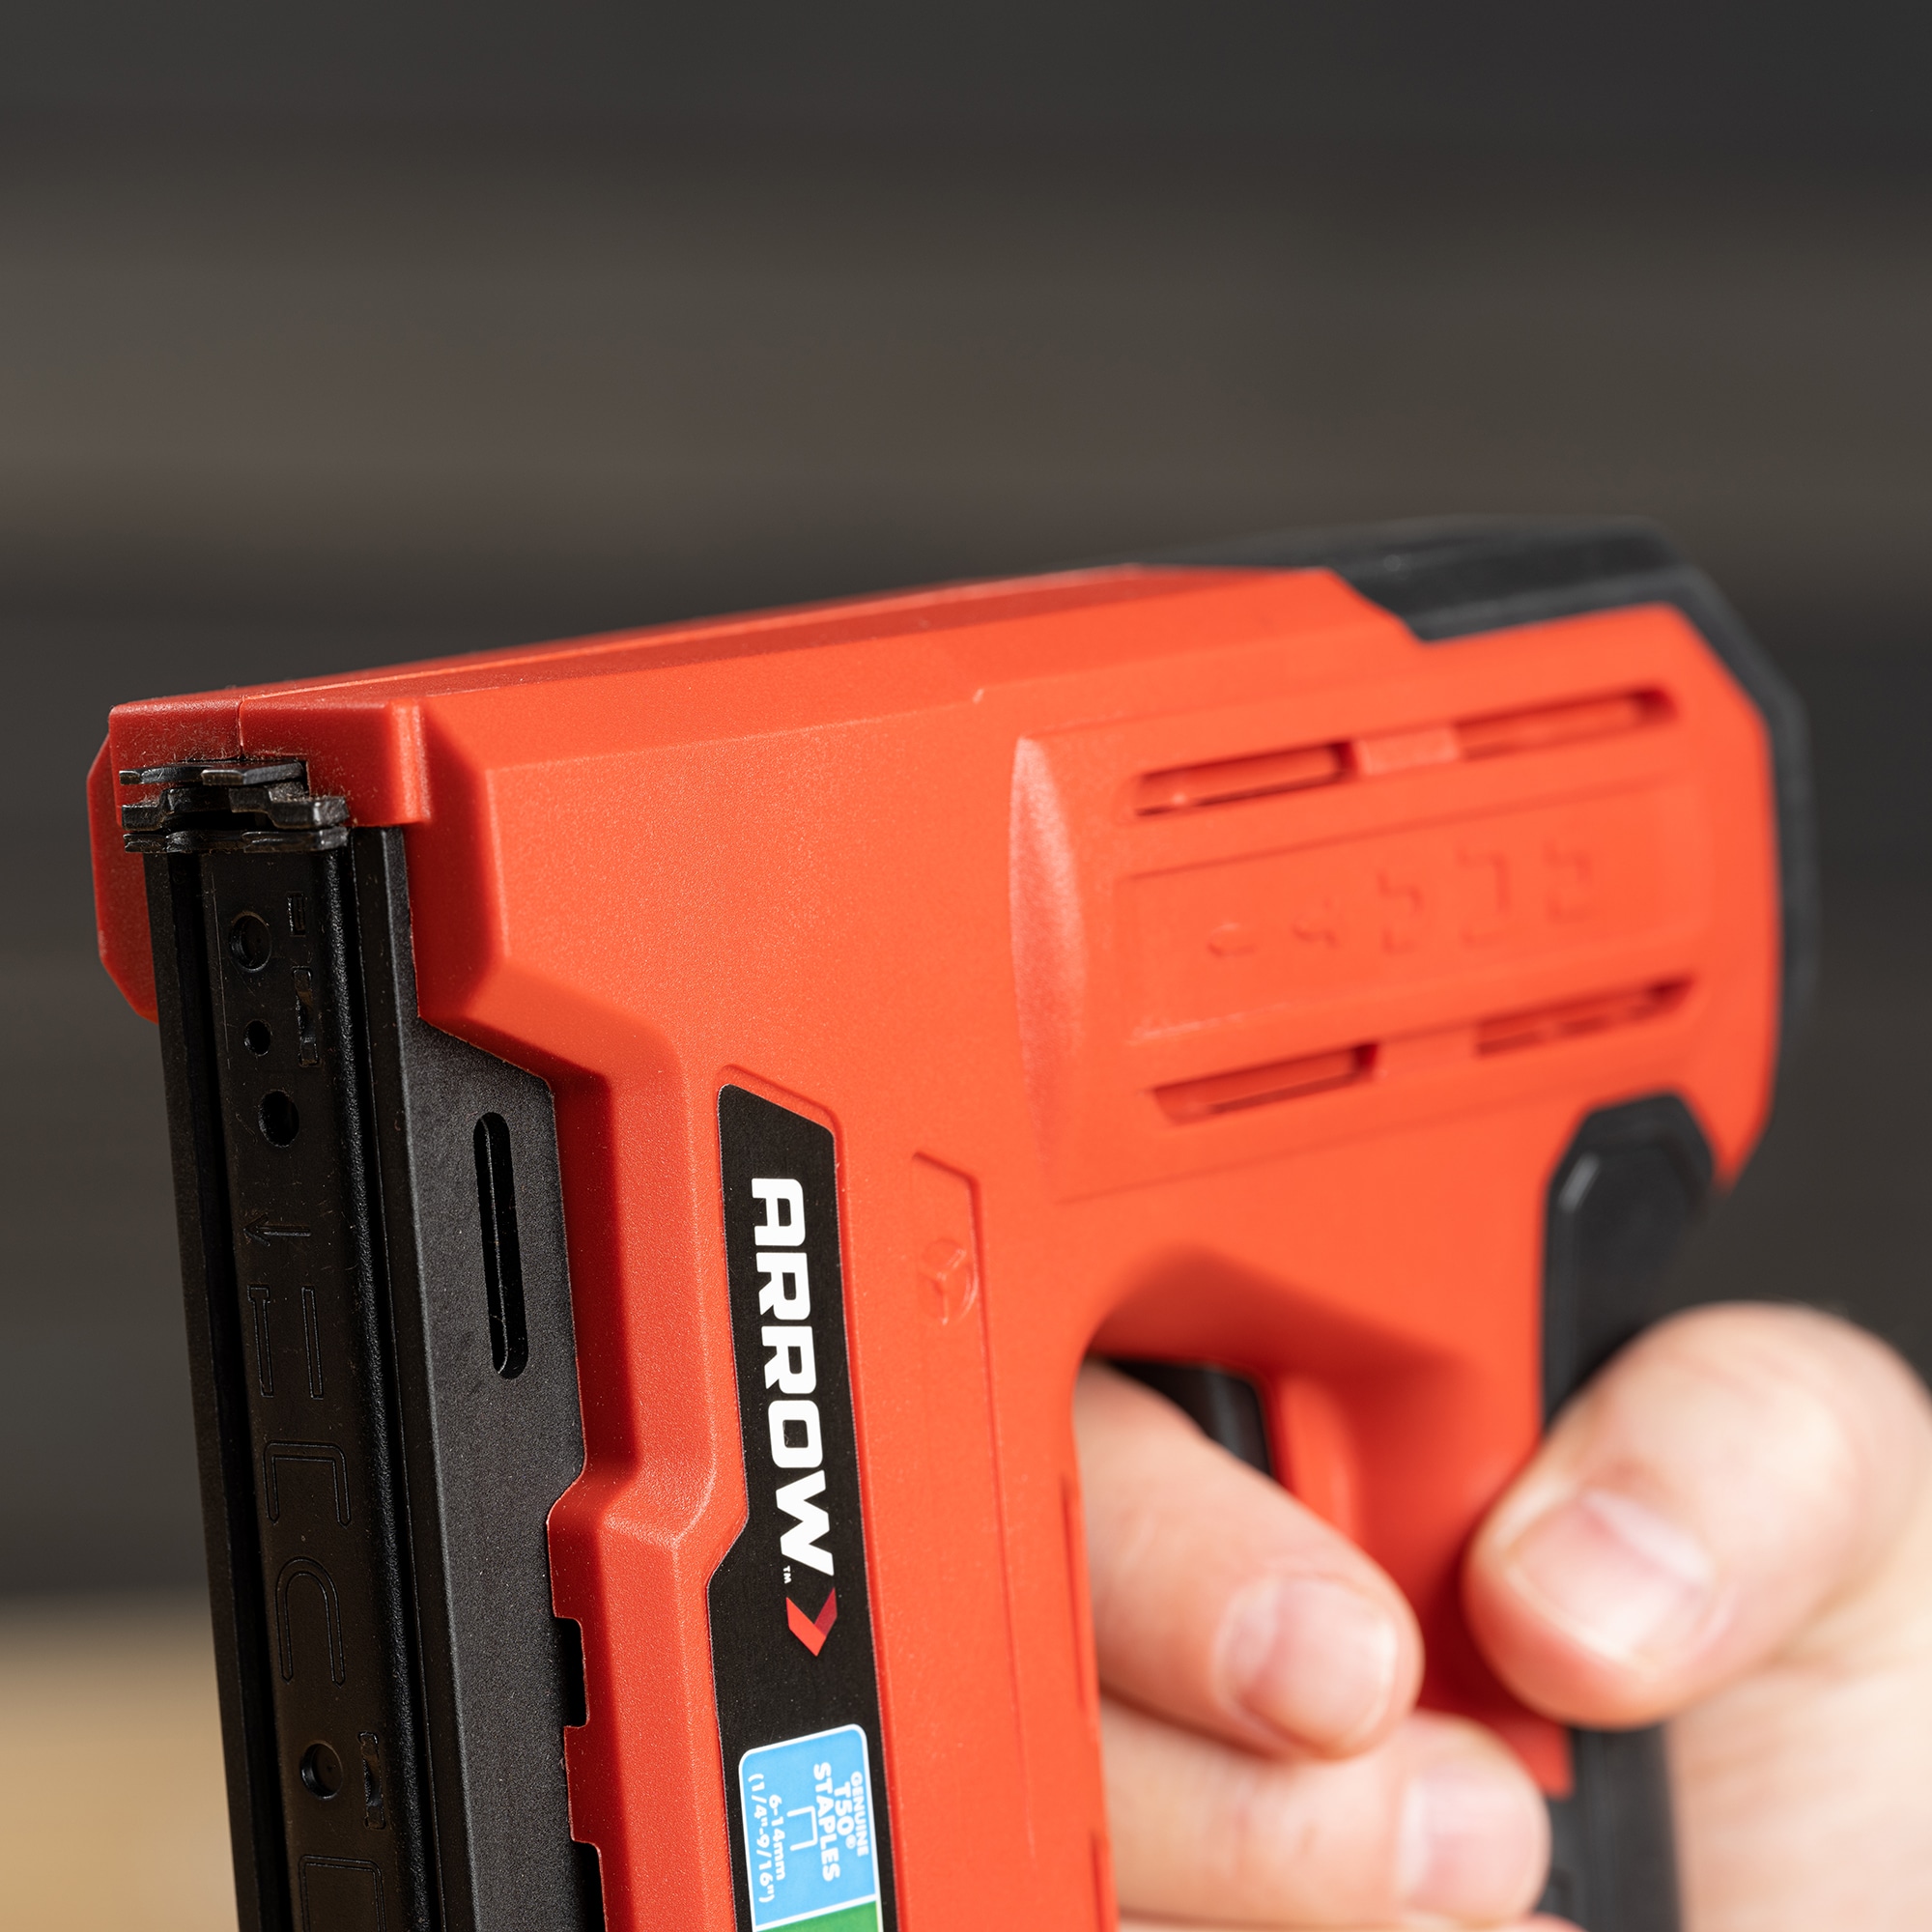 Bostitch 3/8-in Corded Electric Staple Gun at